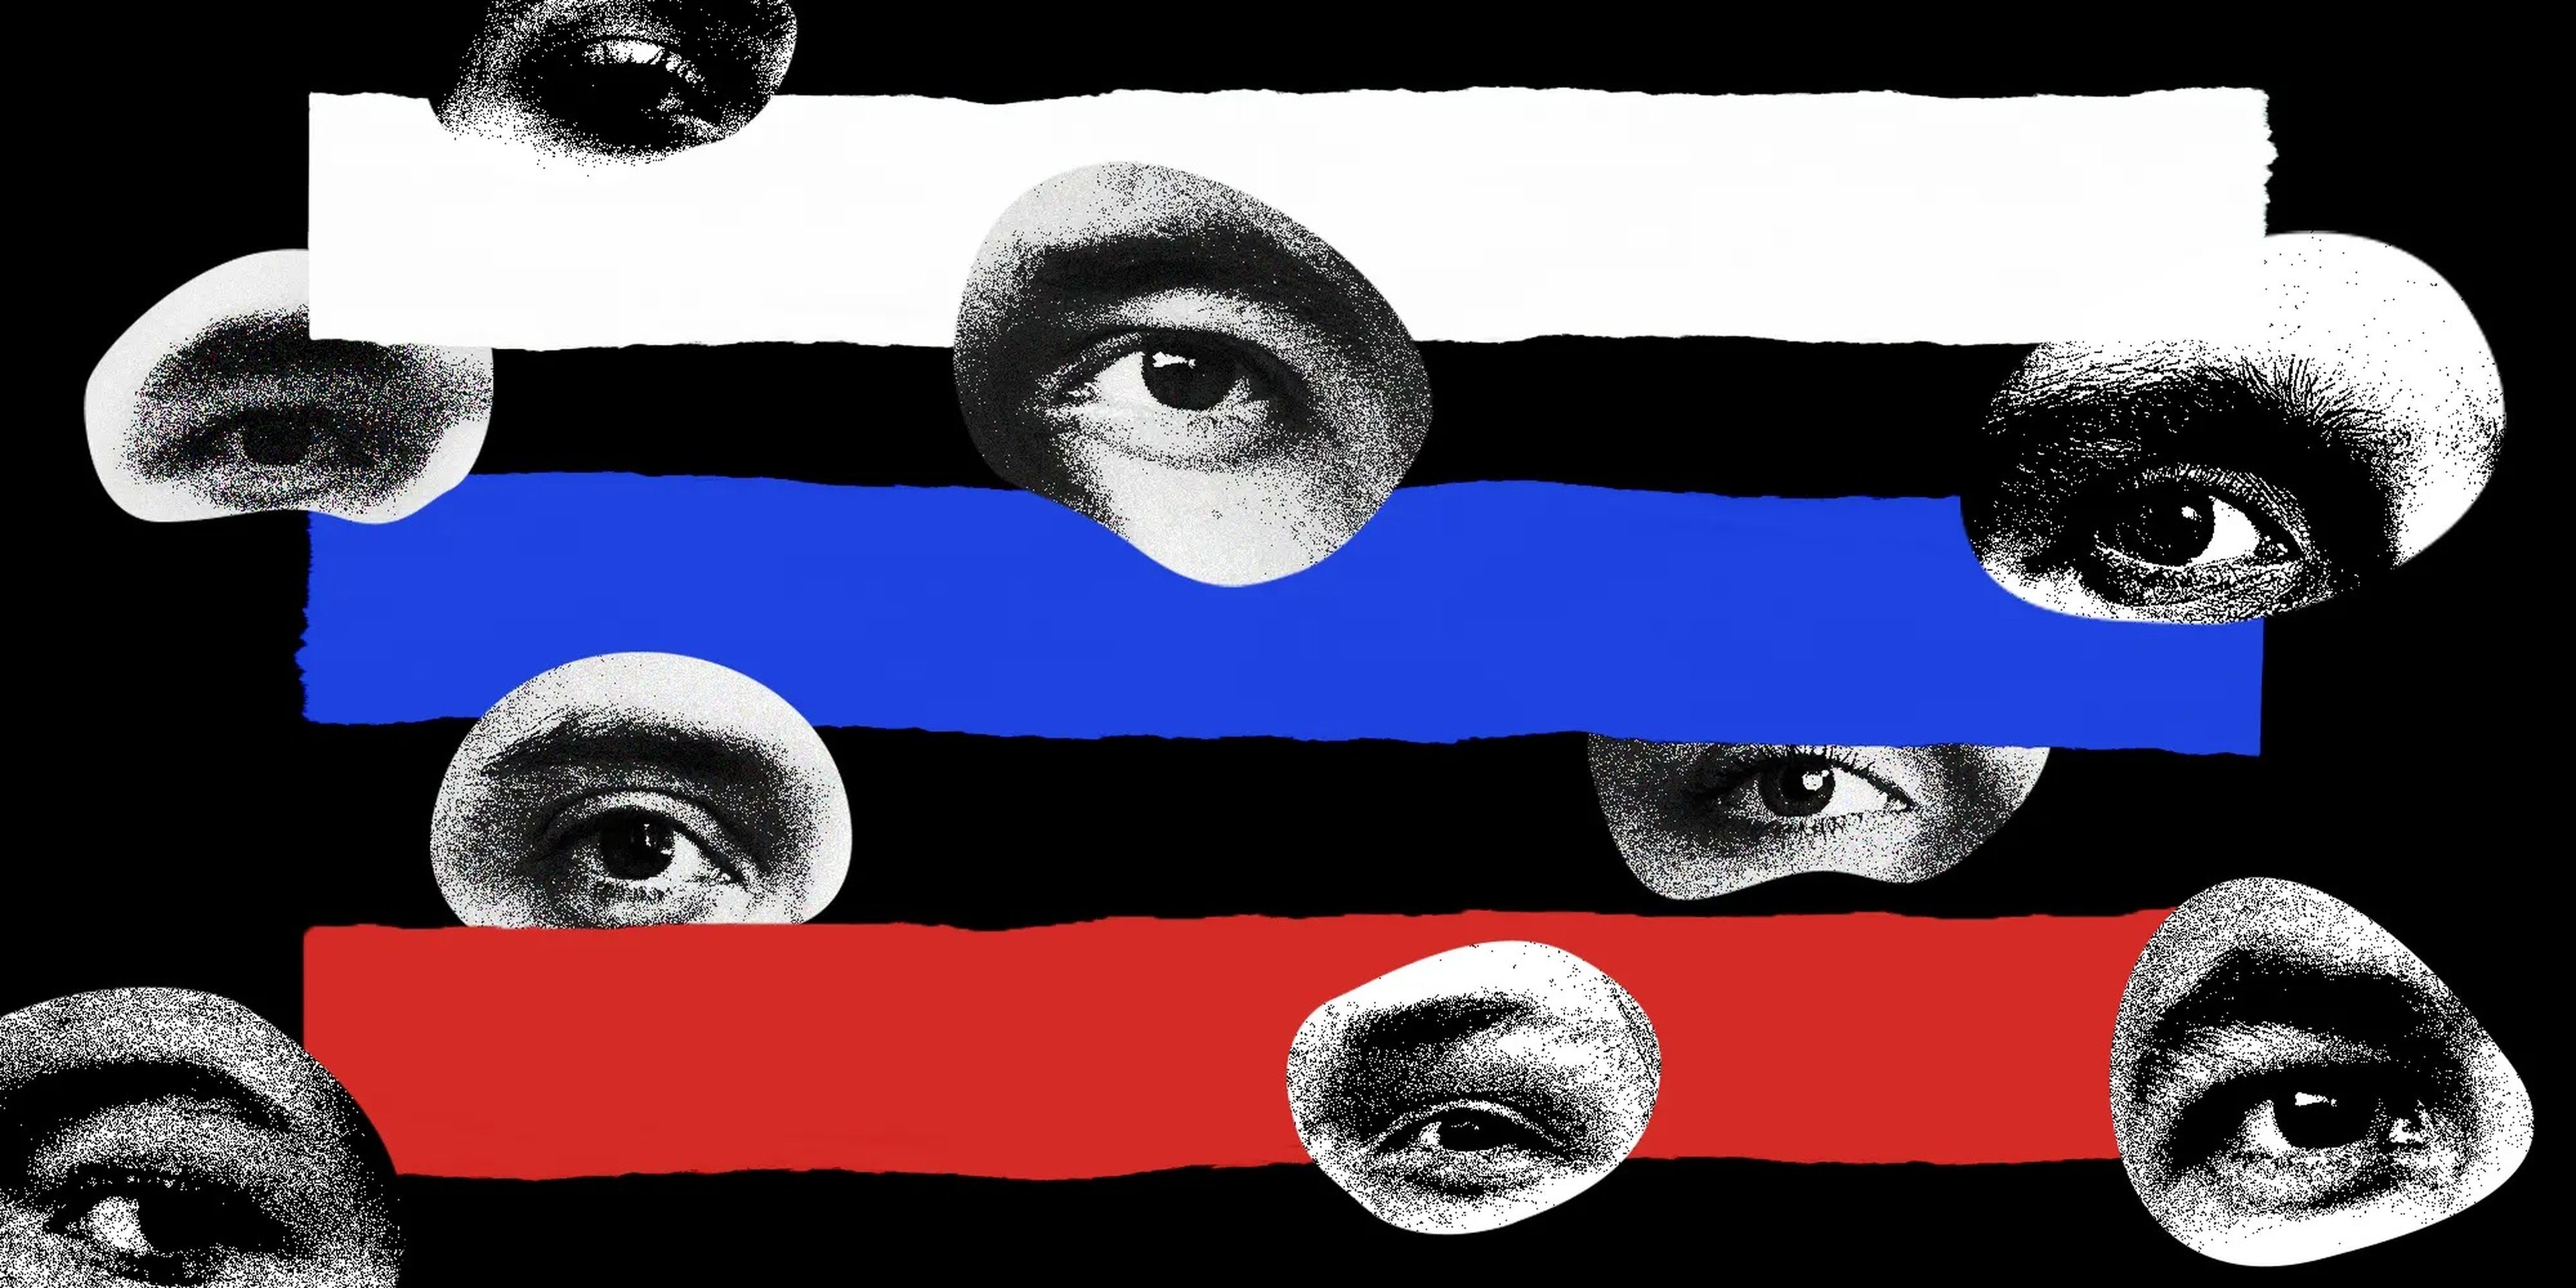 Eyes coming out of the Russian flag.